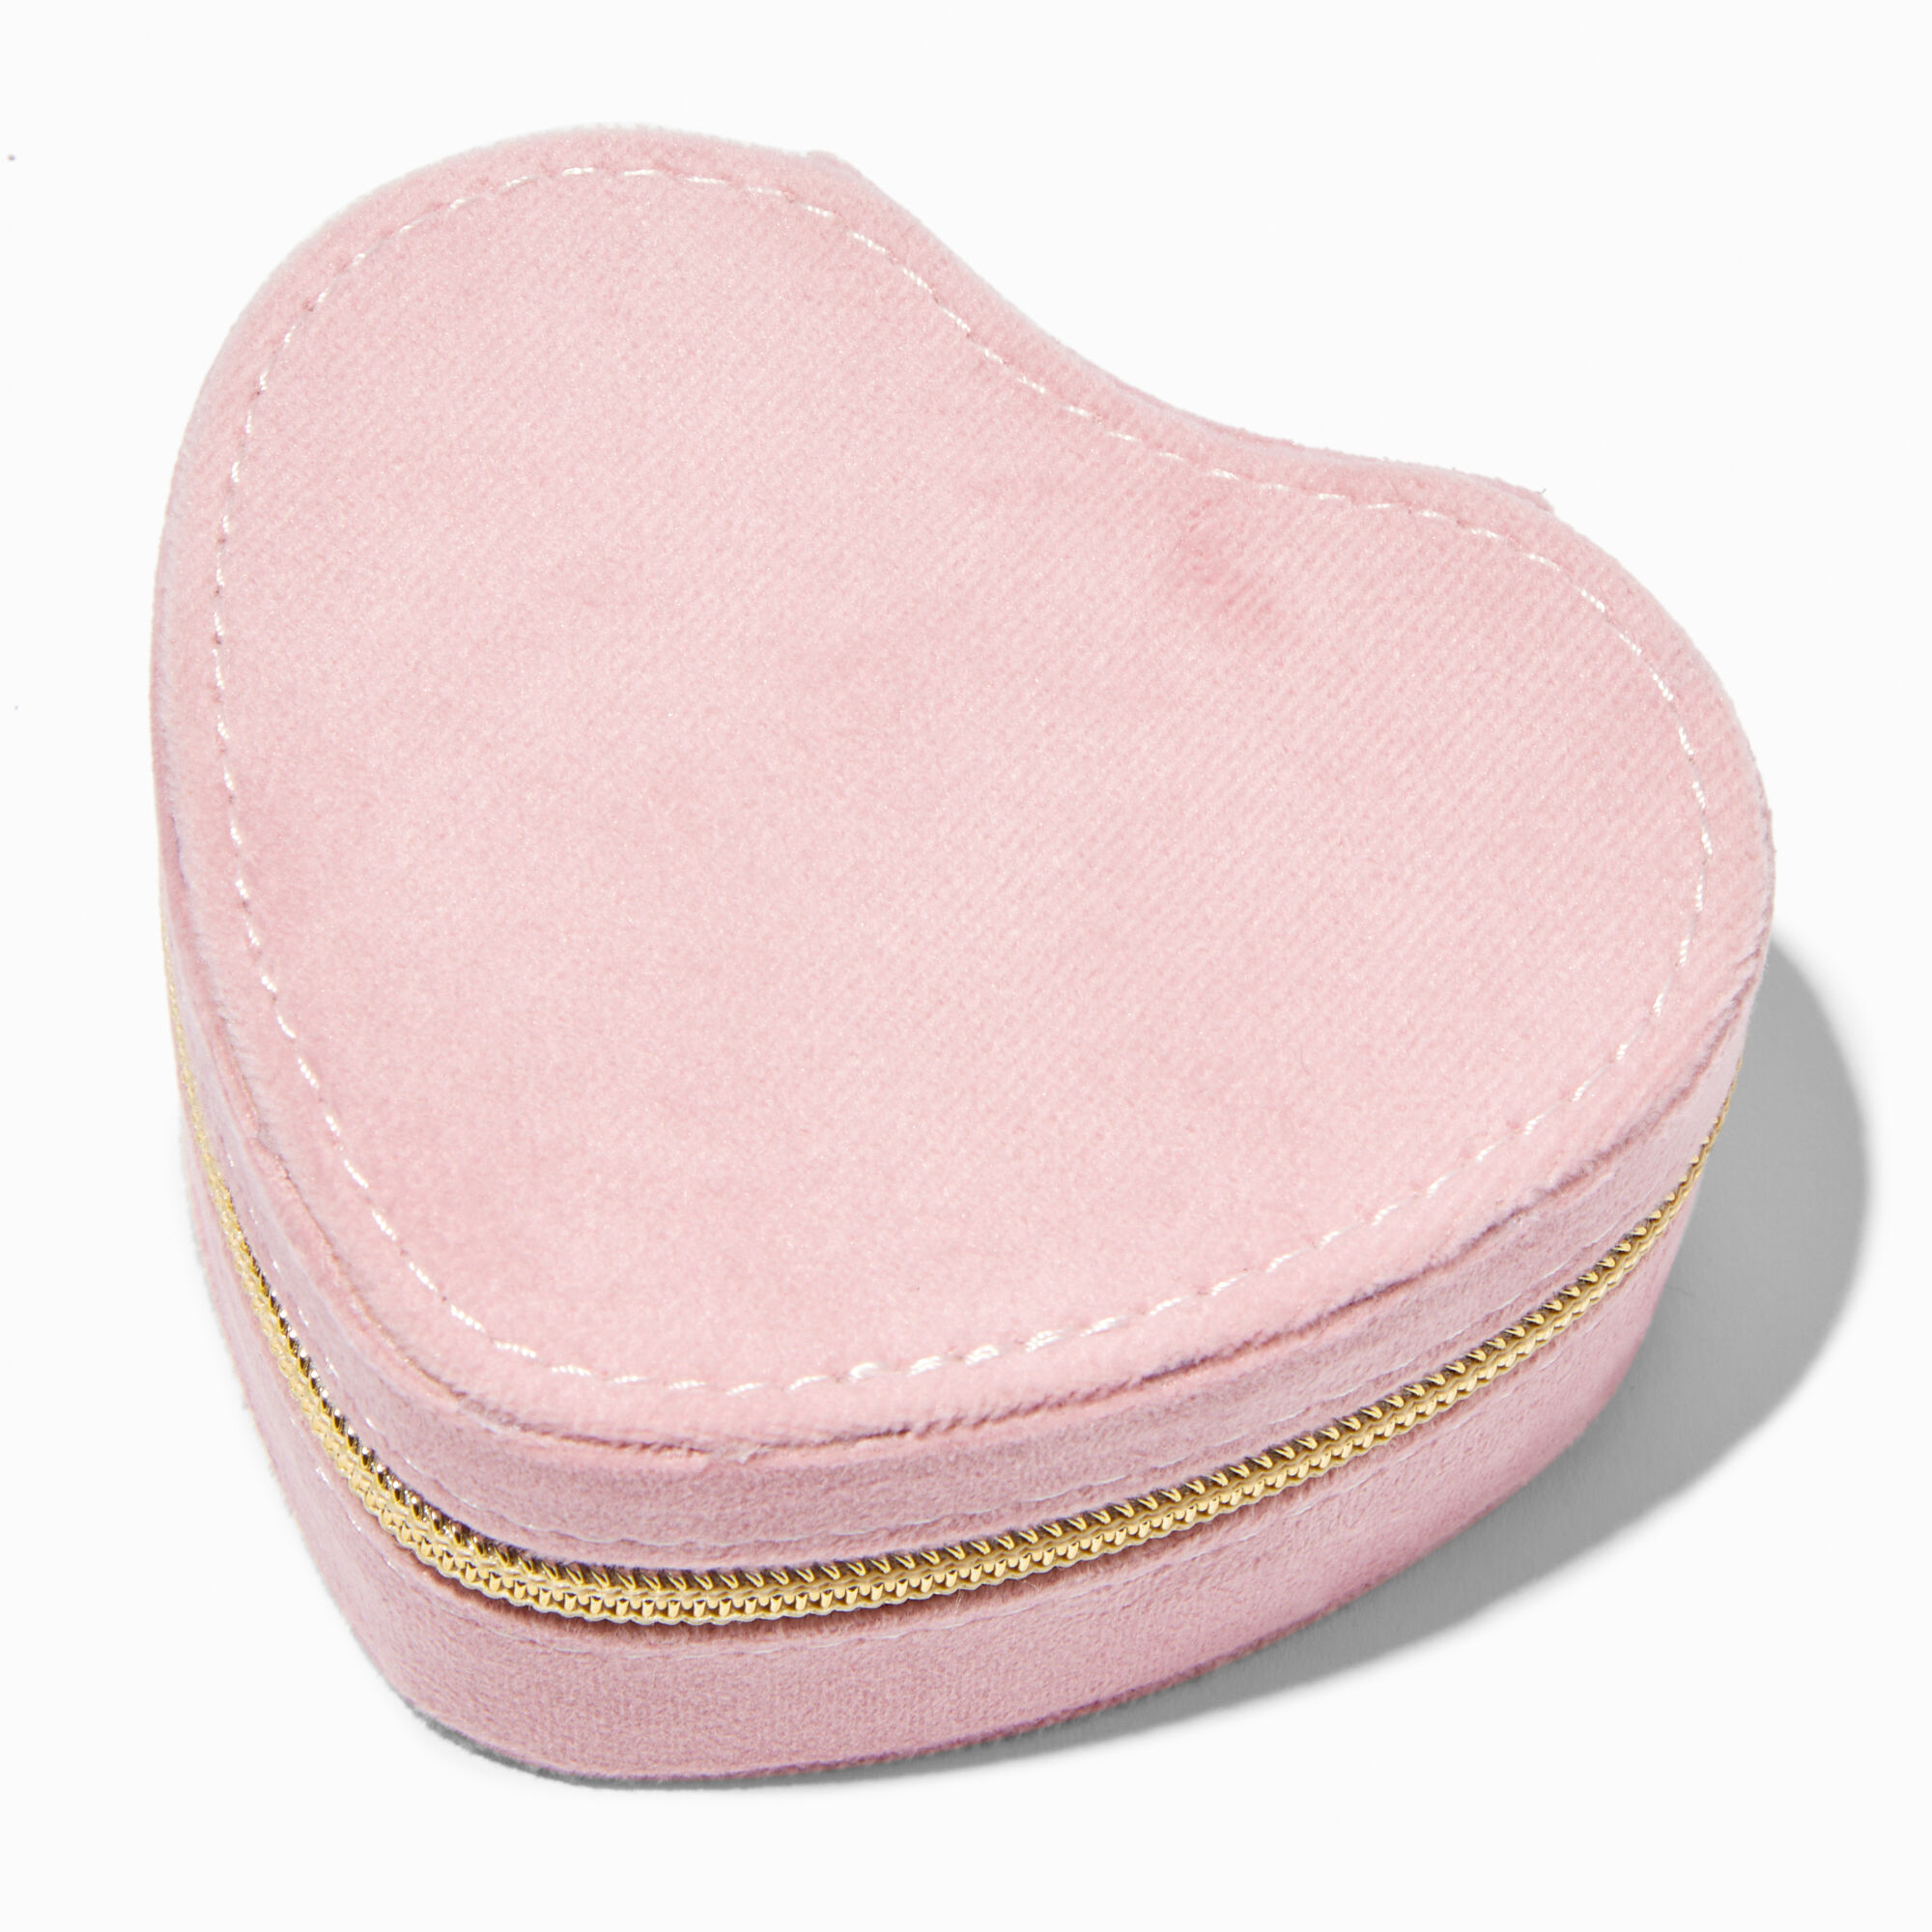 View Claires Blush Heart Jewelry Case Pink information